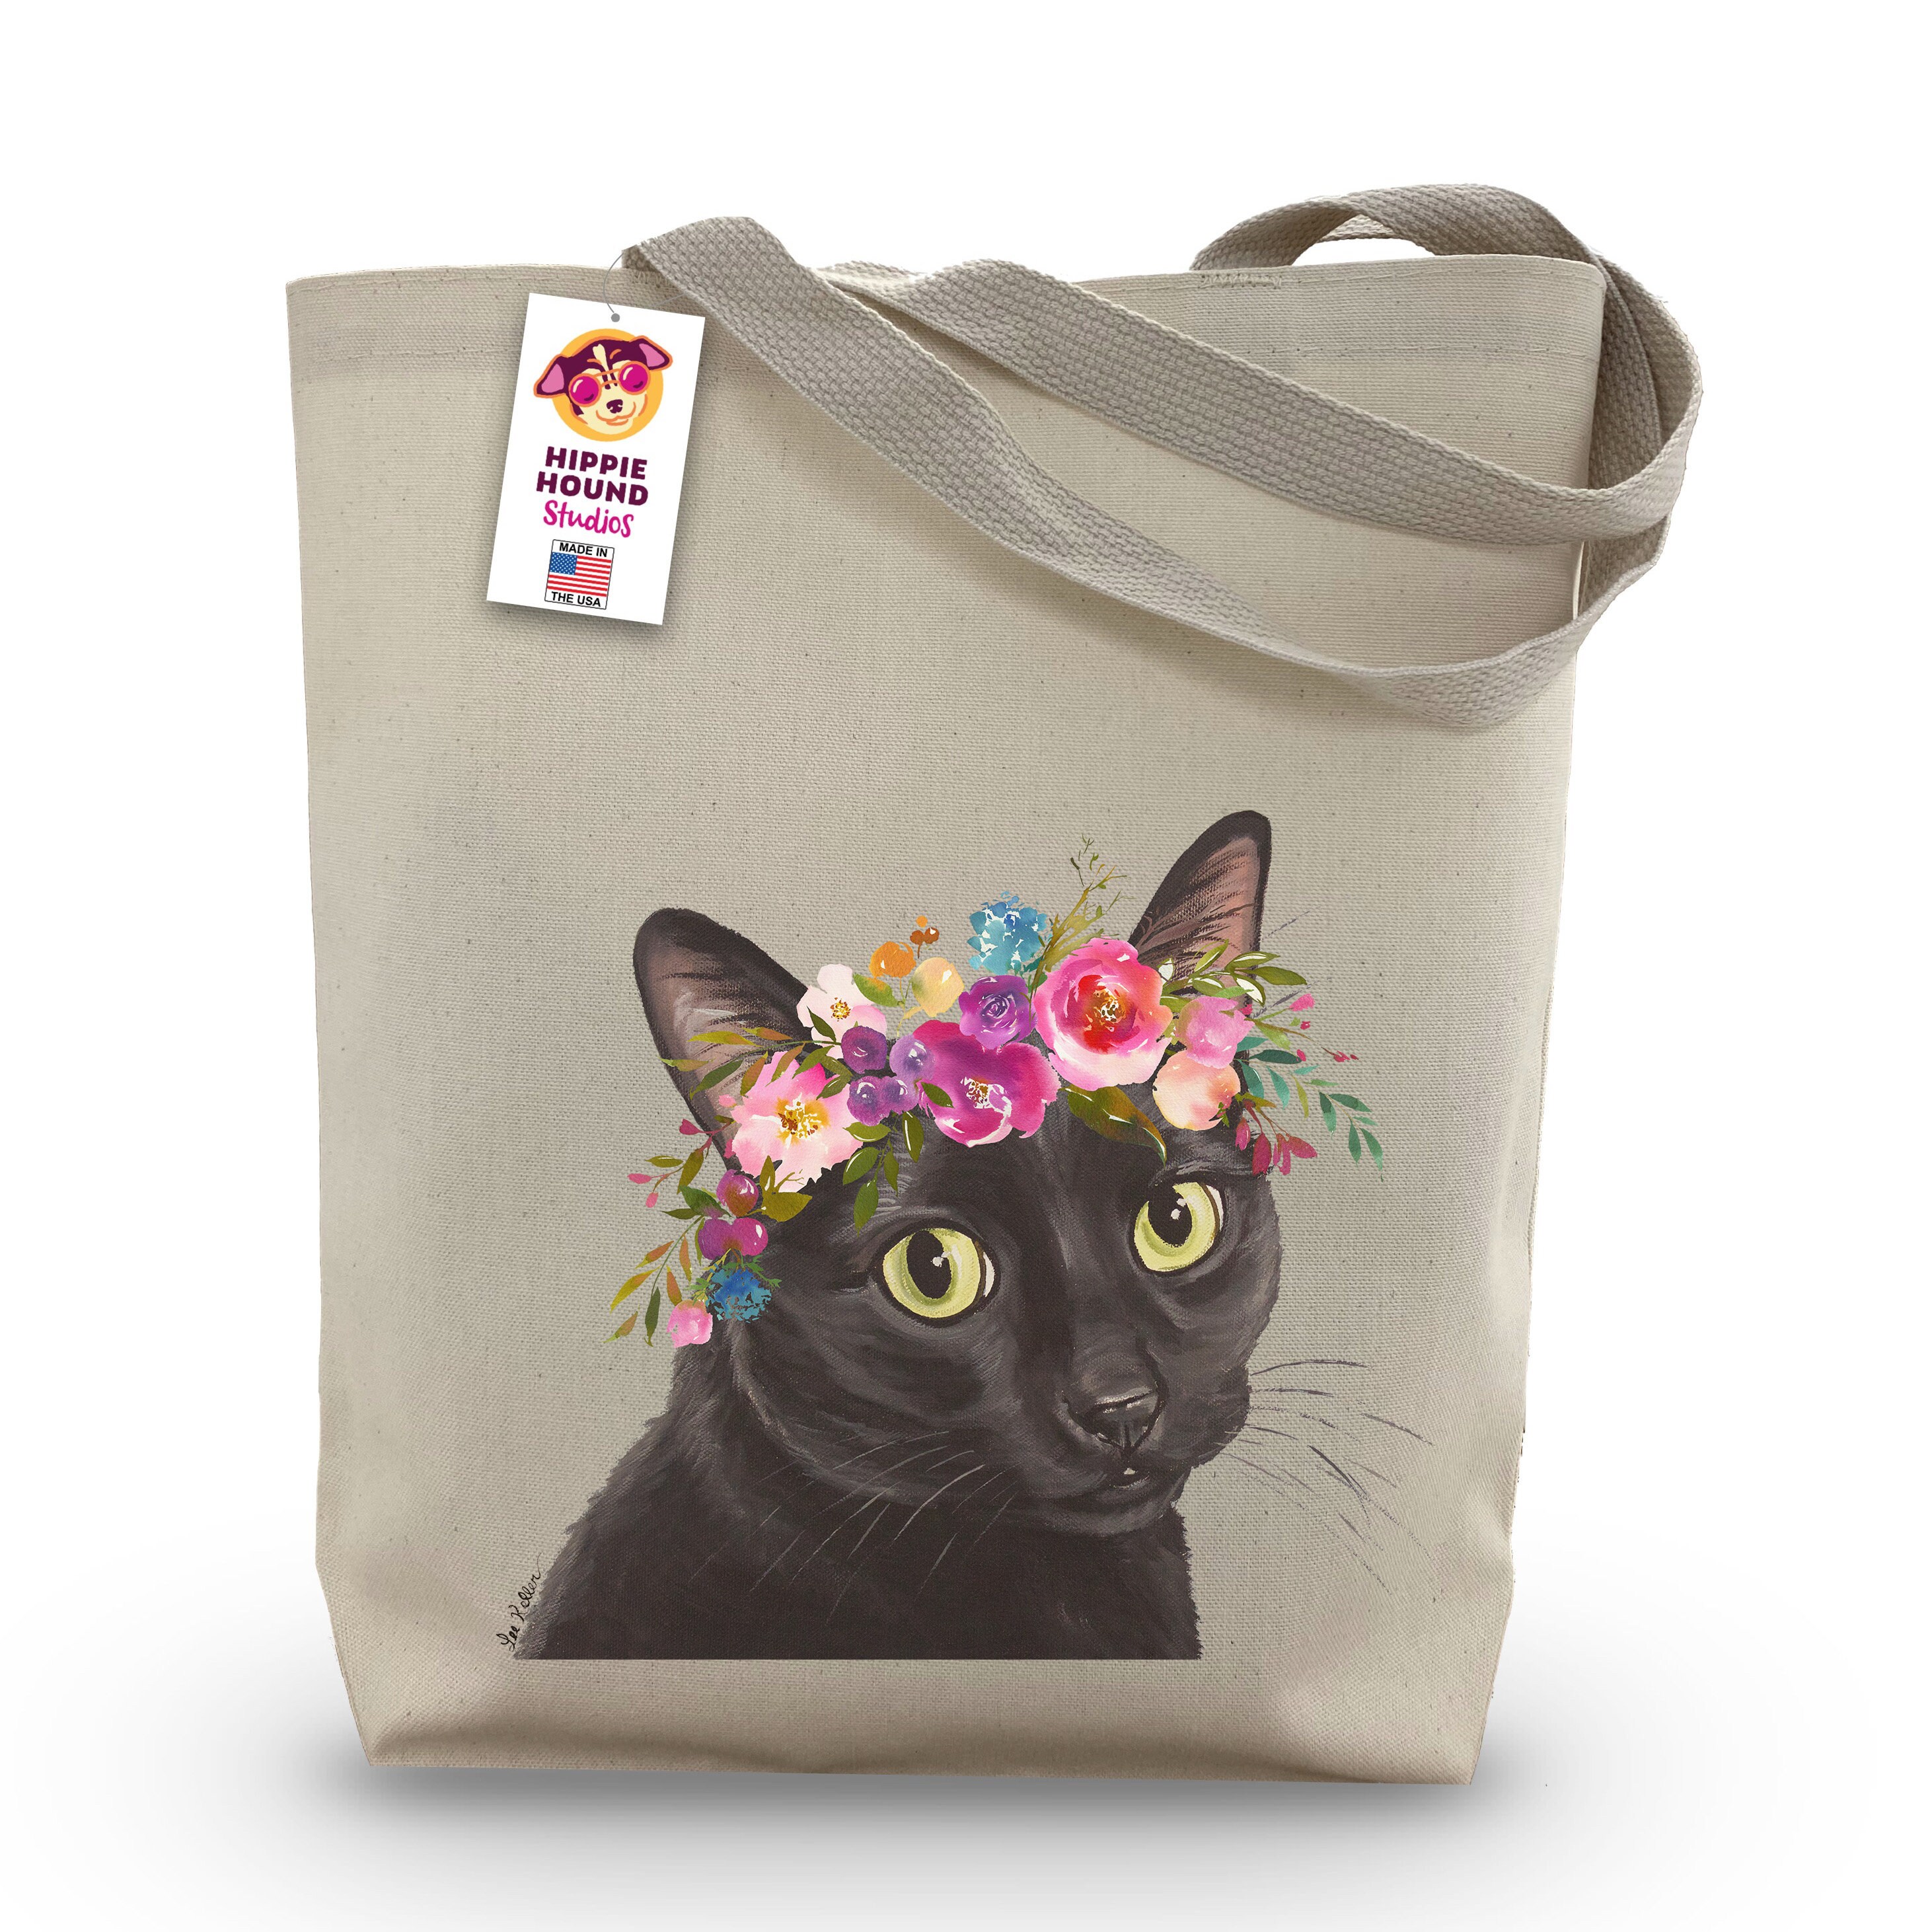 Cat Aesthetic Tote Bag with Pockets, Hippie Cat Lovers Gift, Cat Mom Canvas  Bag, Retro Tote, Pussy Cat Themed Gifts for Teachers, Cat Dad